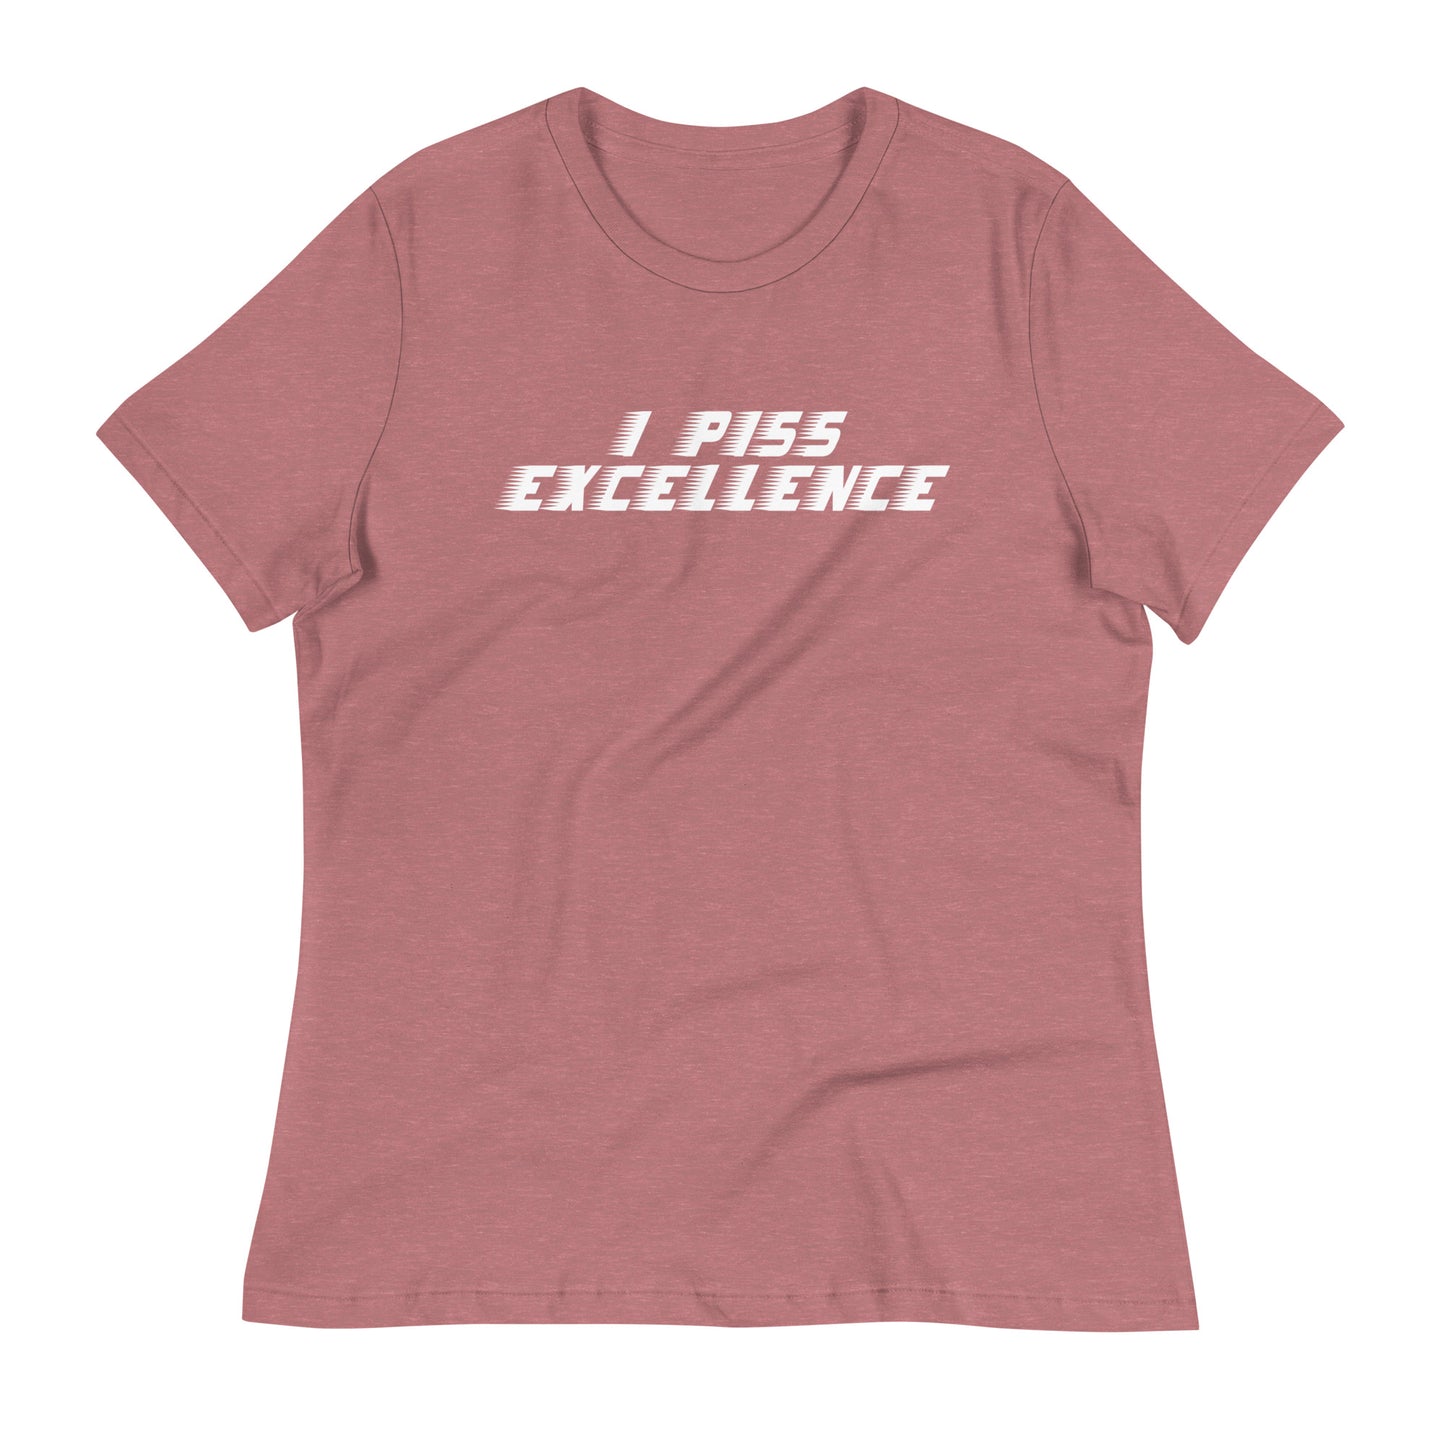 I Piss Excellence Women's Signature Tee